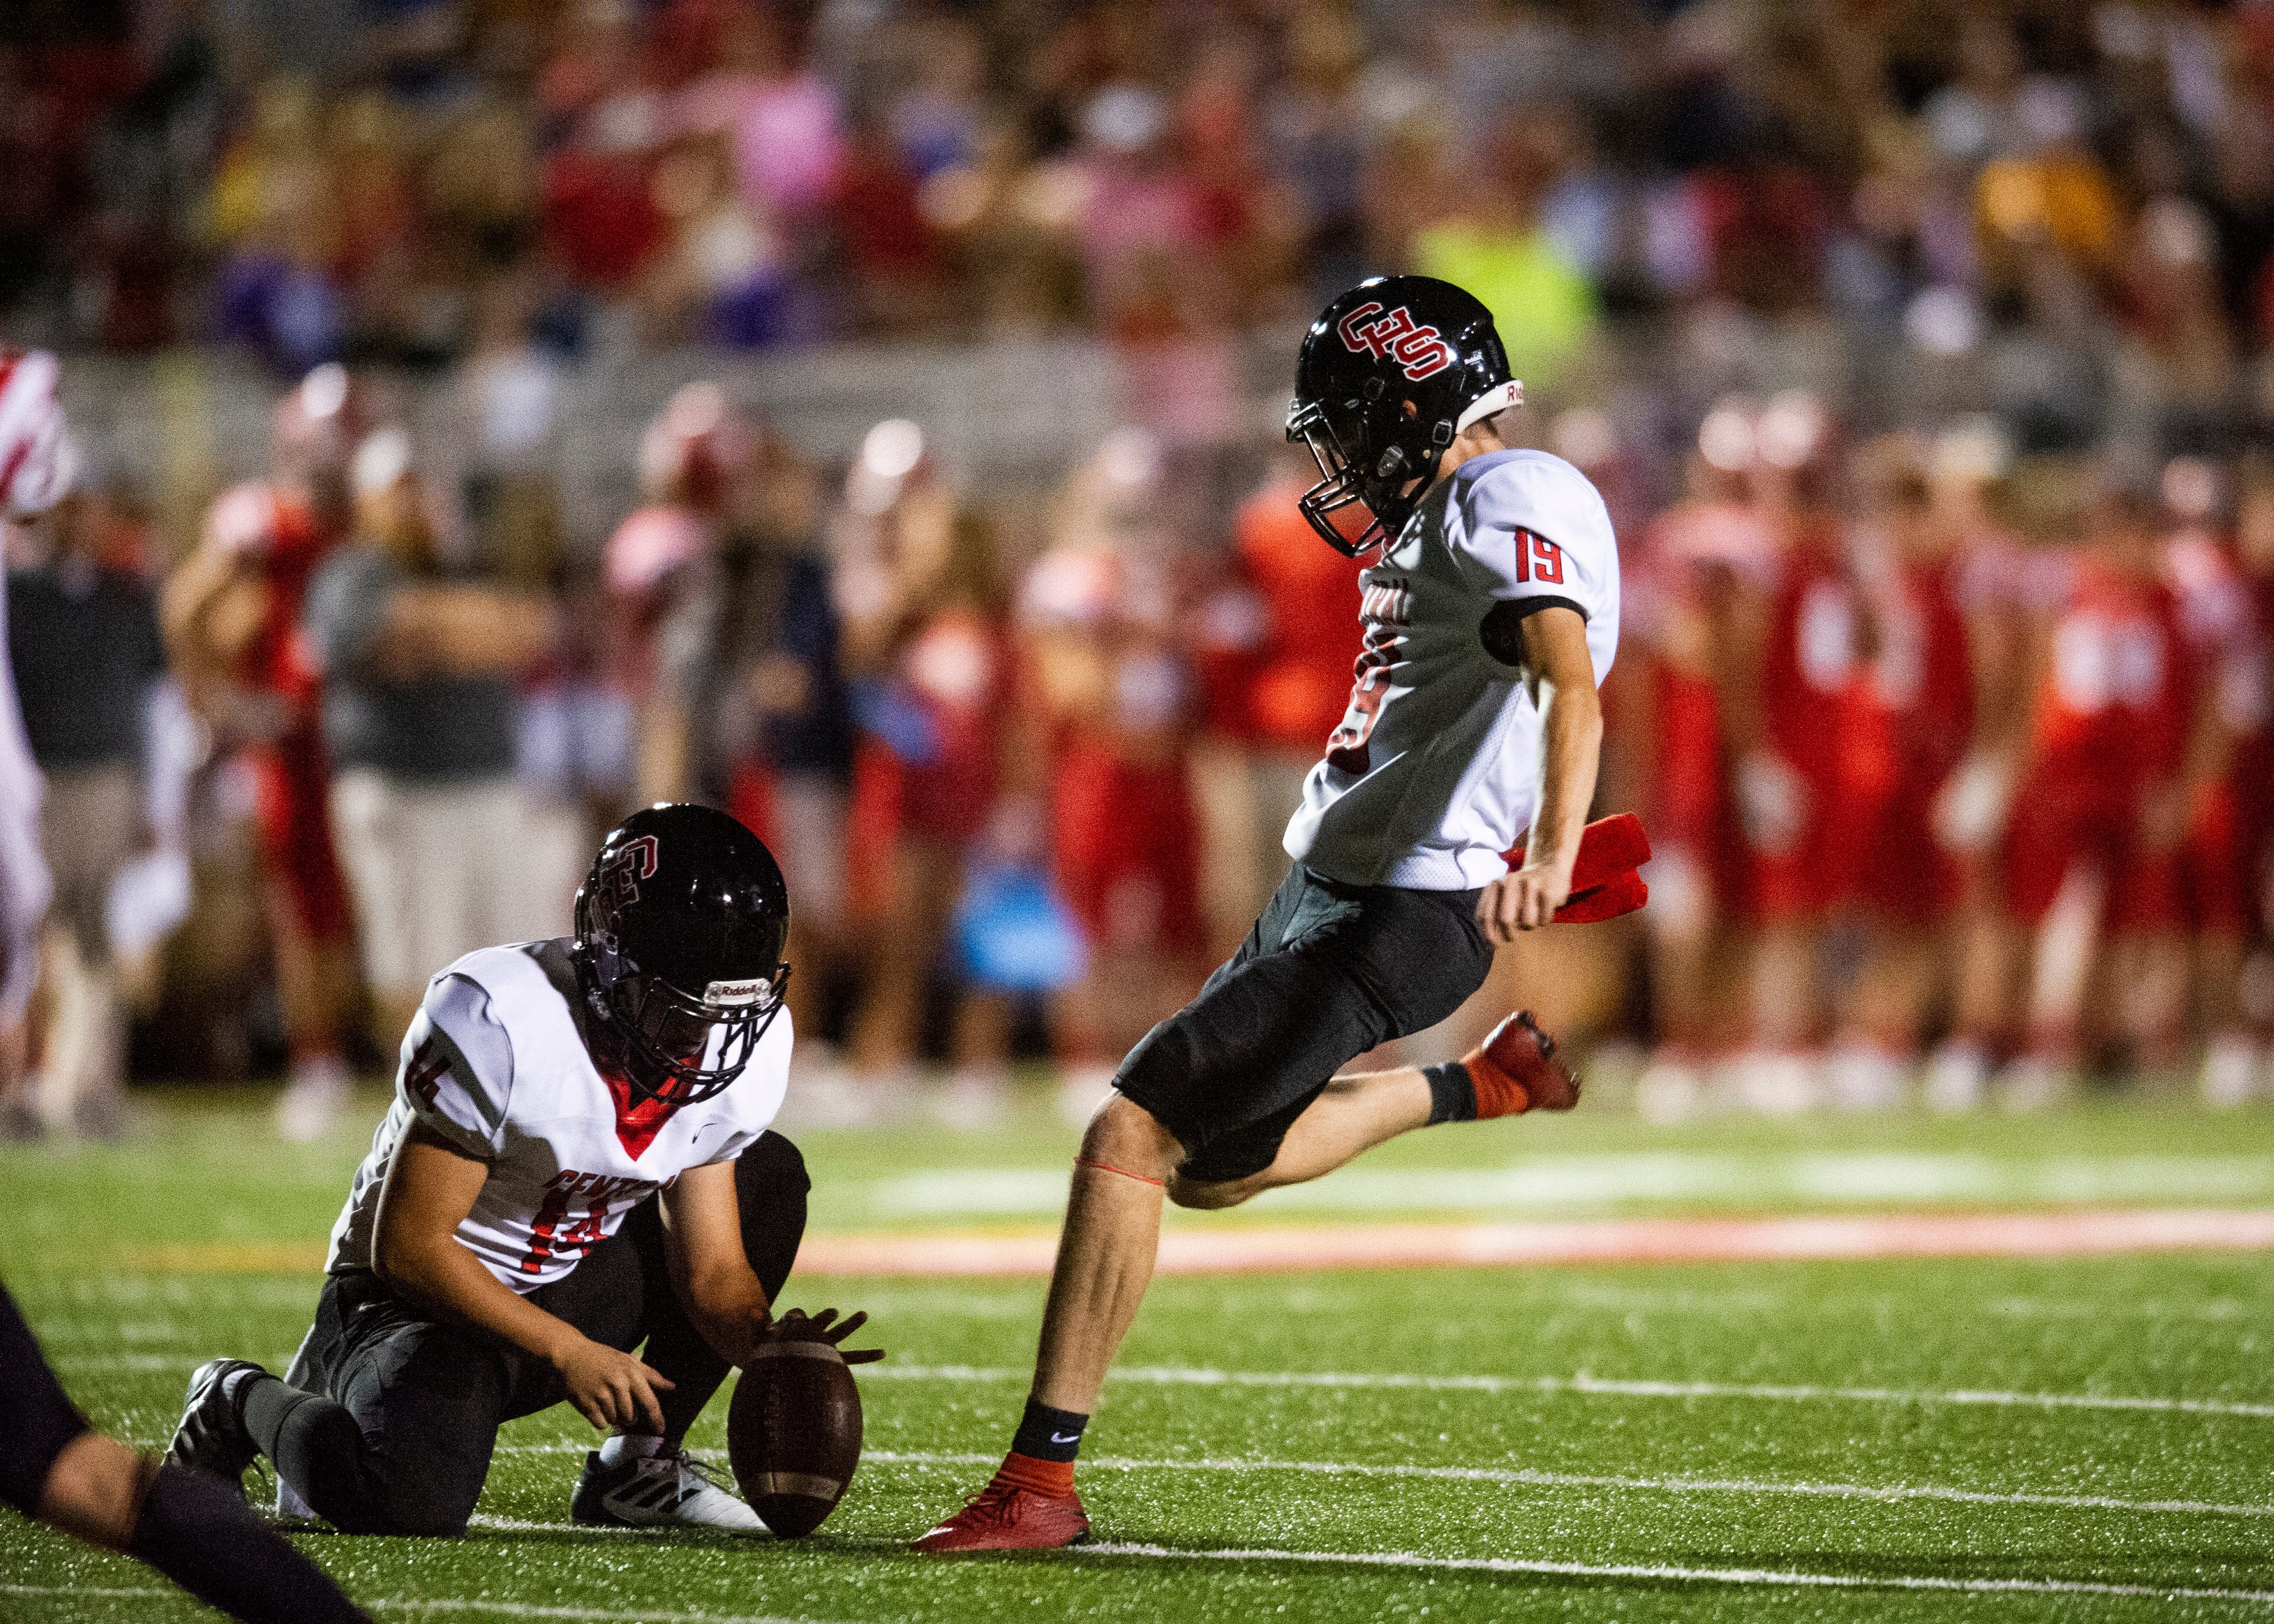 Central's Jarred Swislosky (19) prepares to kick the ball during the Halls and Central high school football game on Friday, October 4, 2019 at Halls High School.